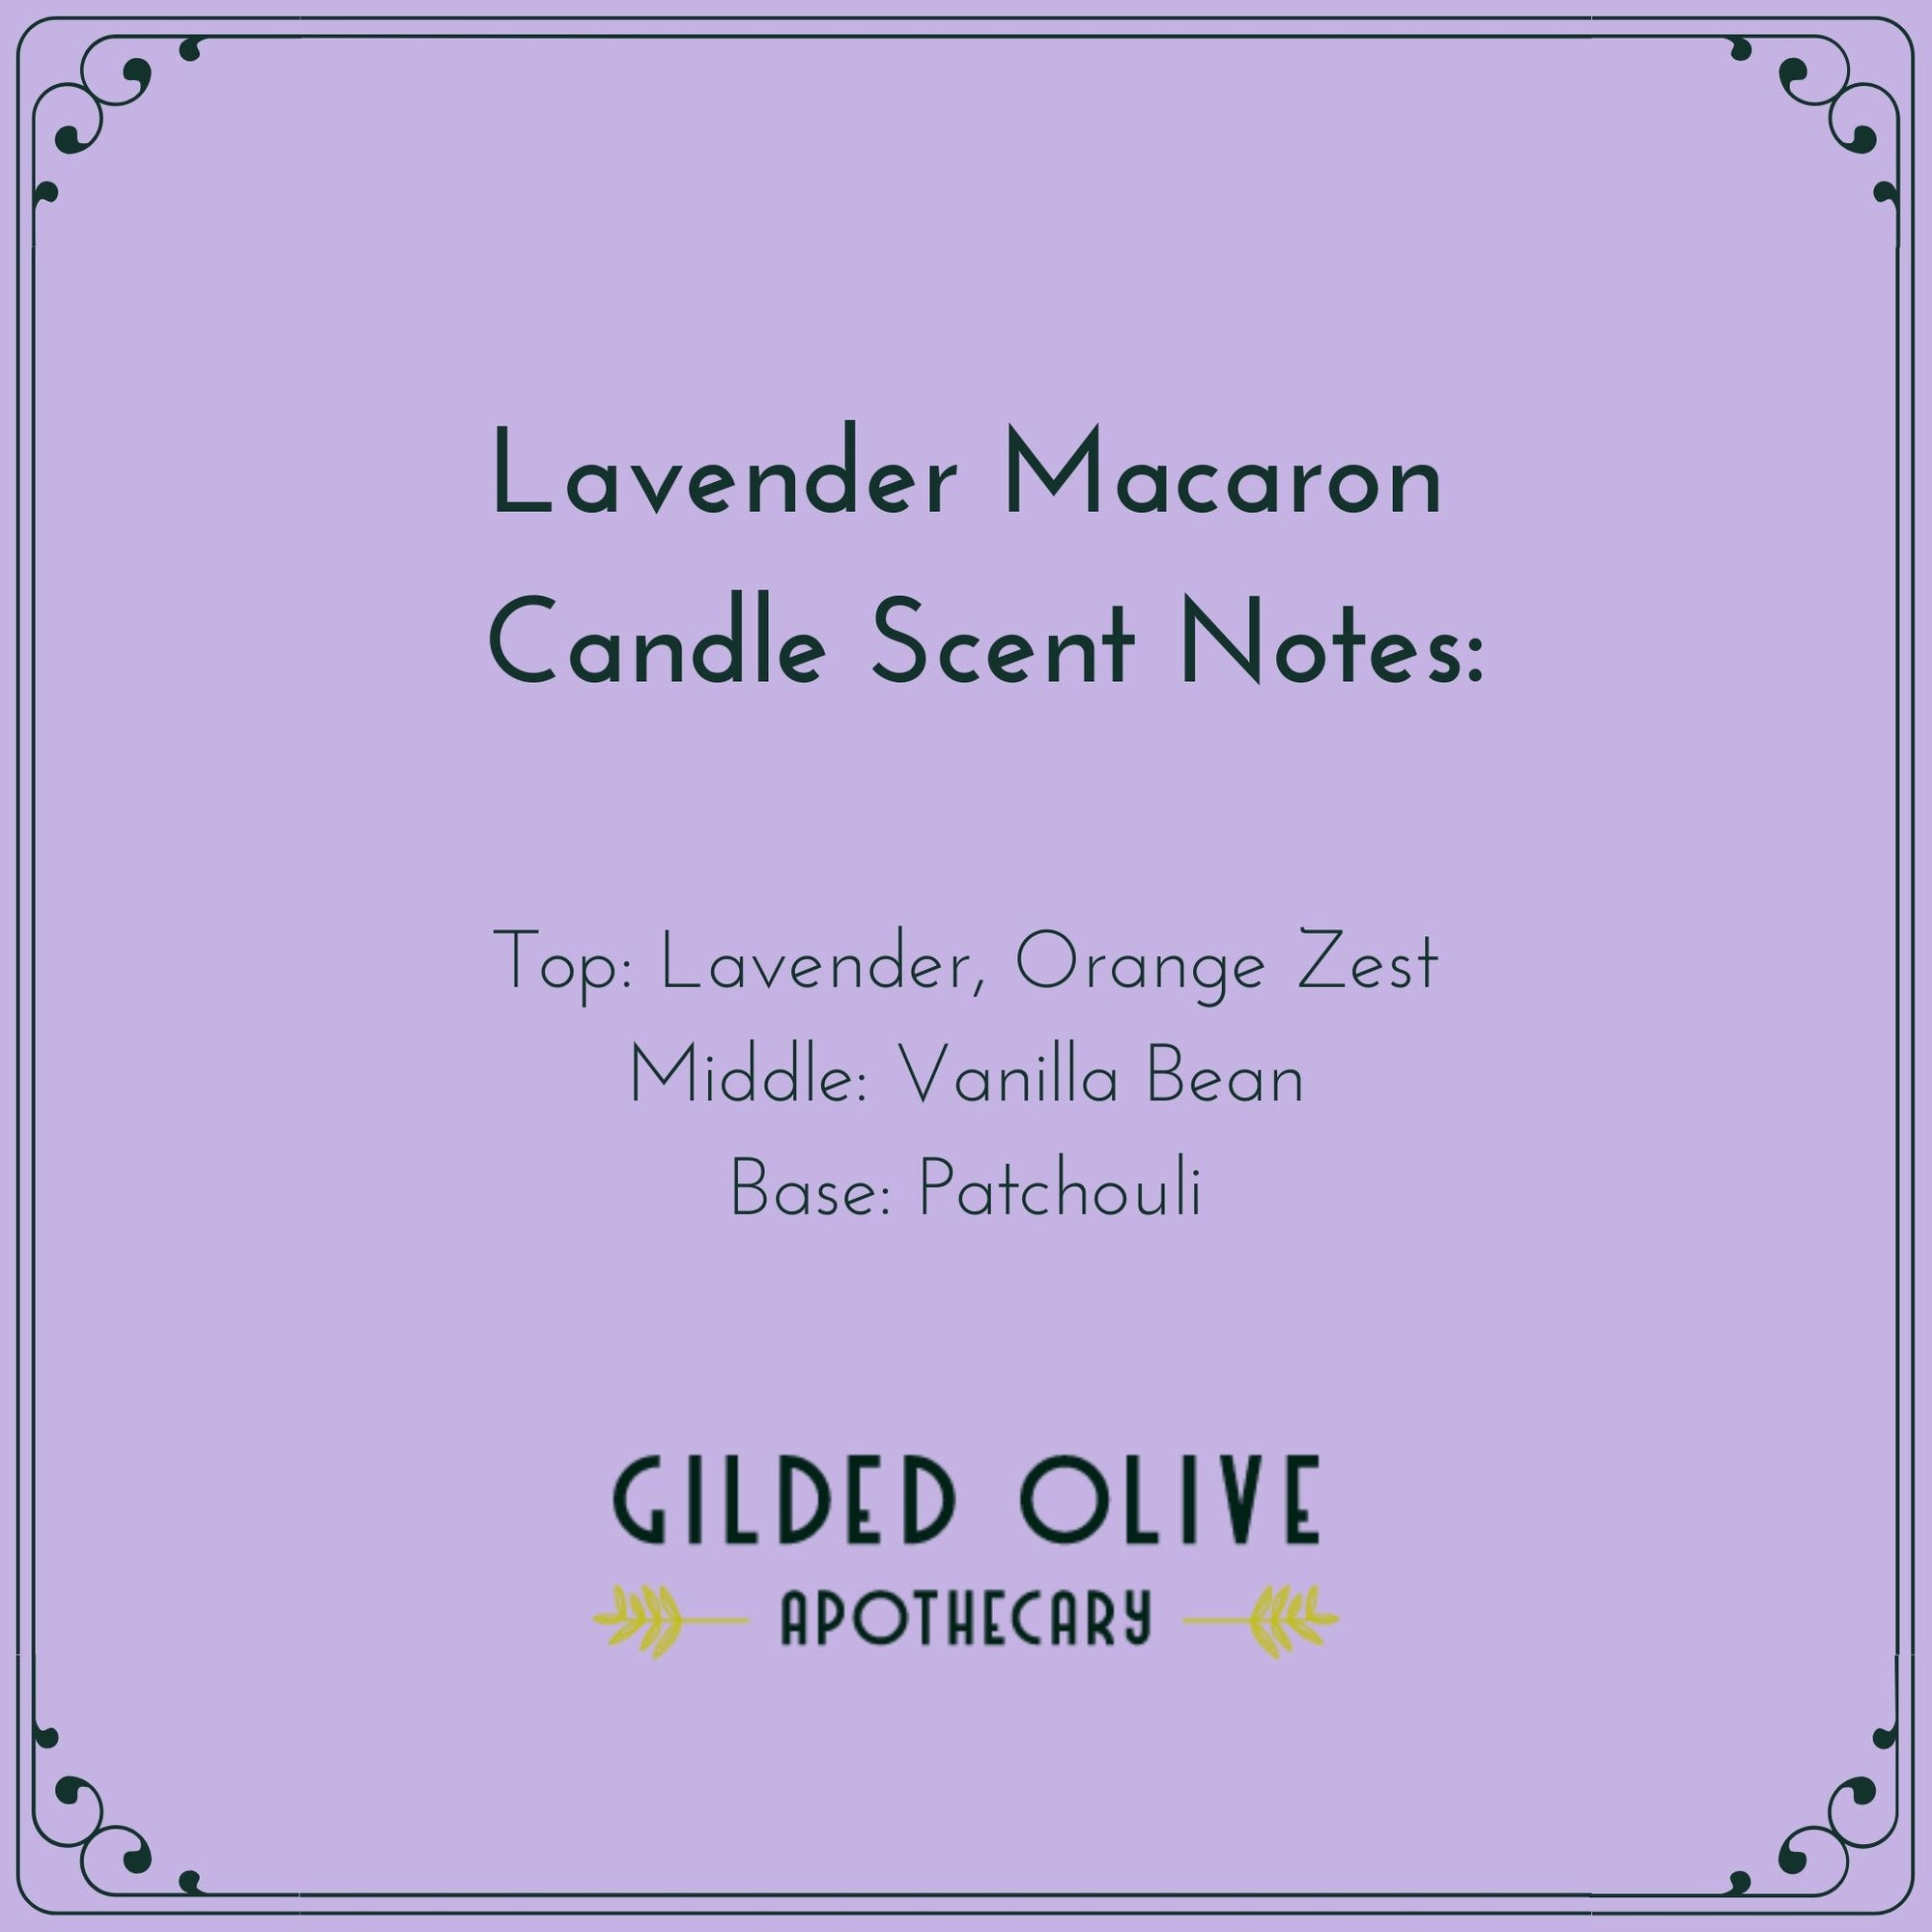 Lavender Macaron Candle Scent Notes